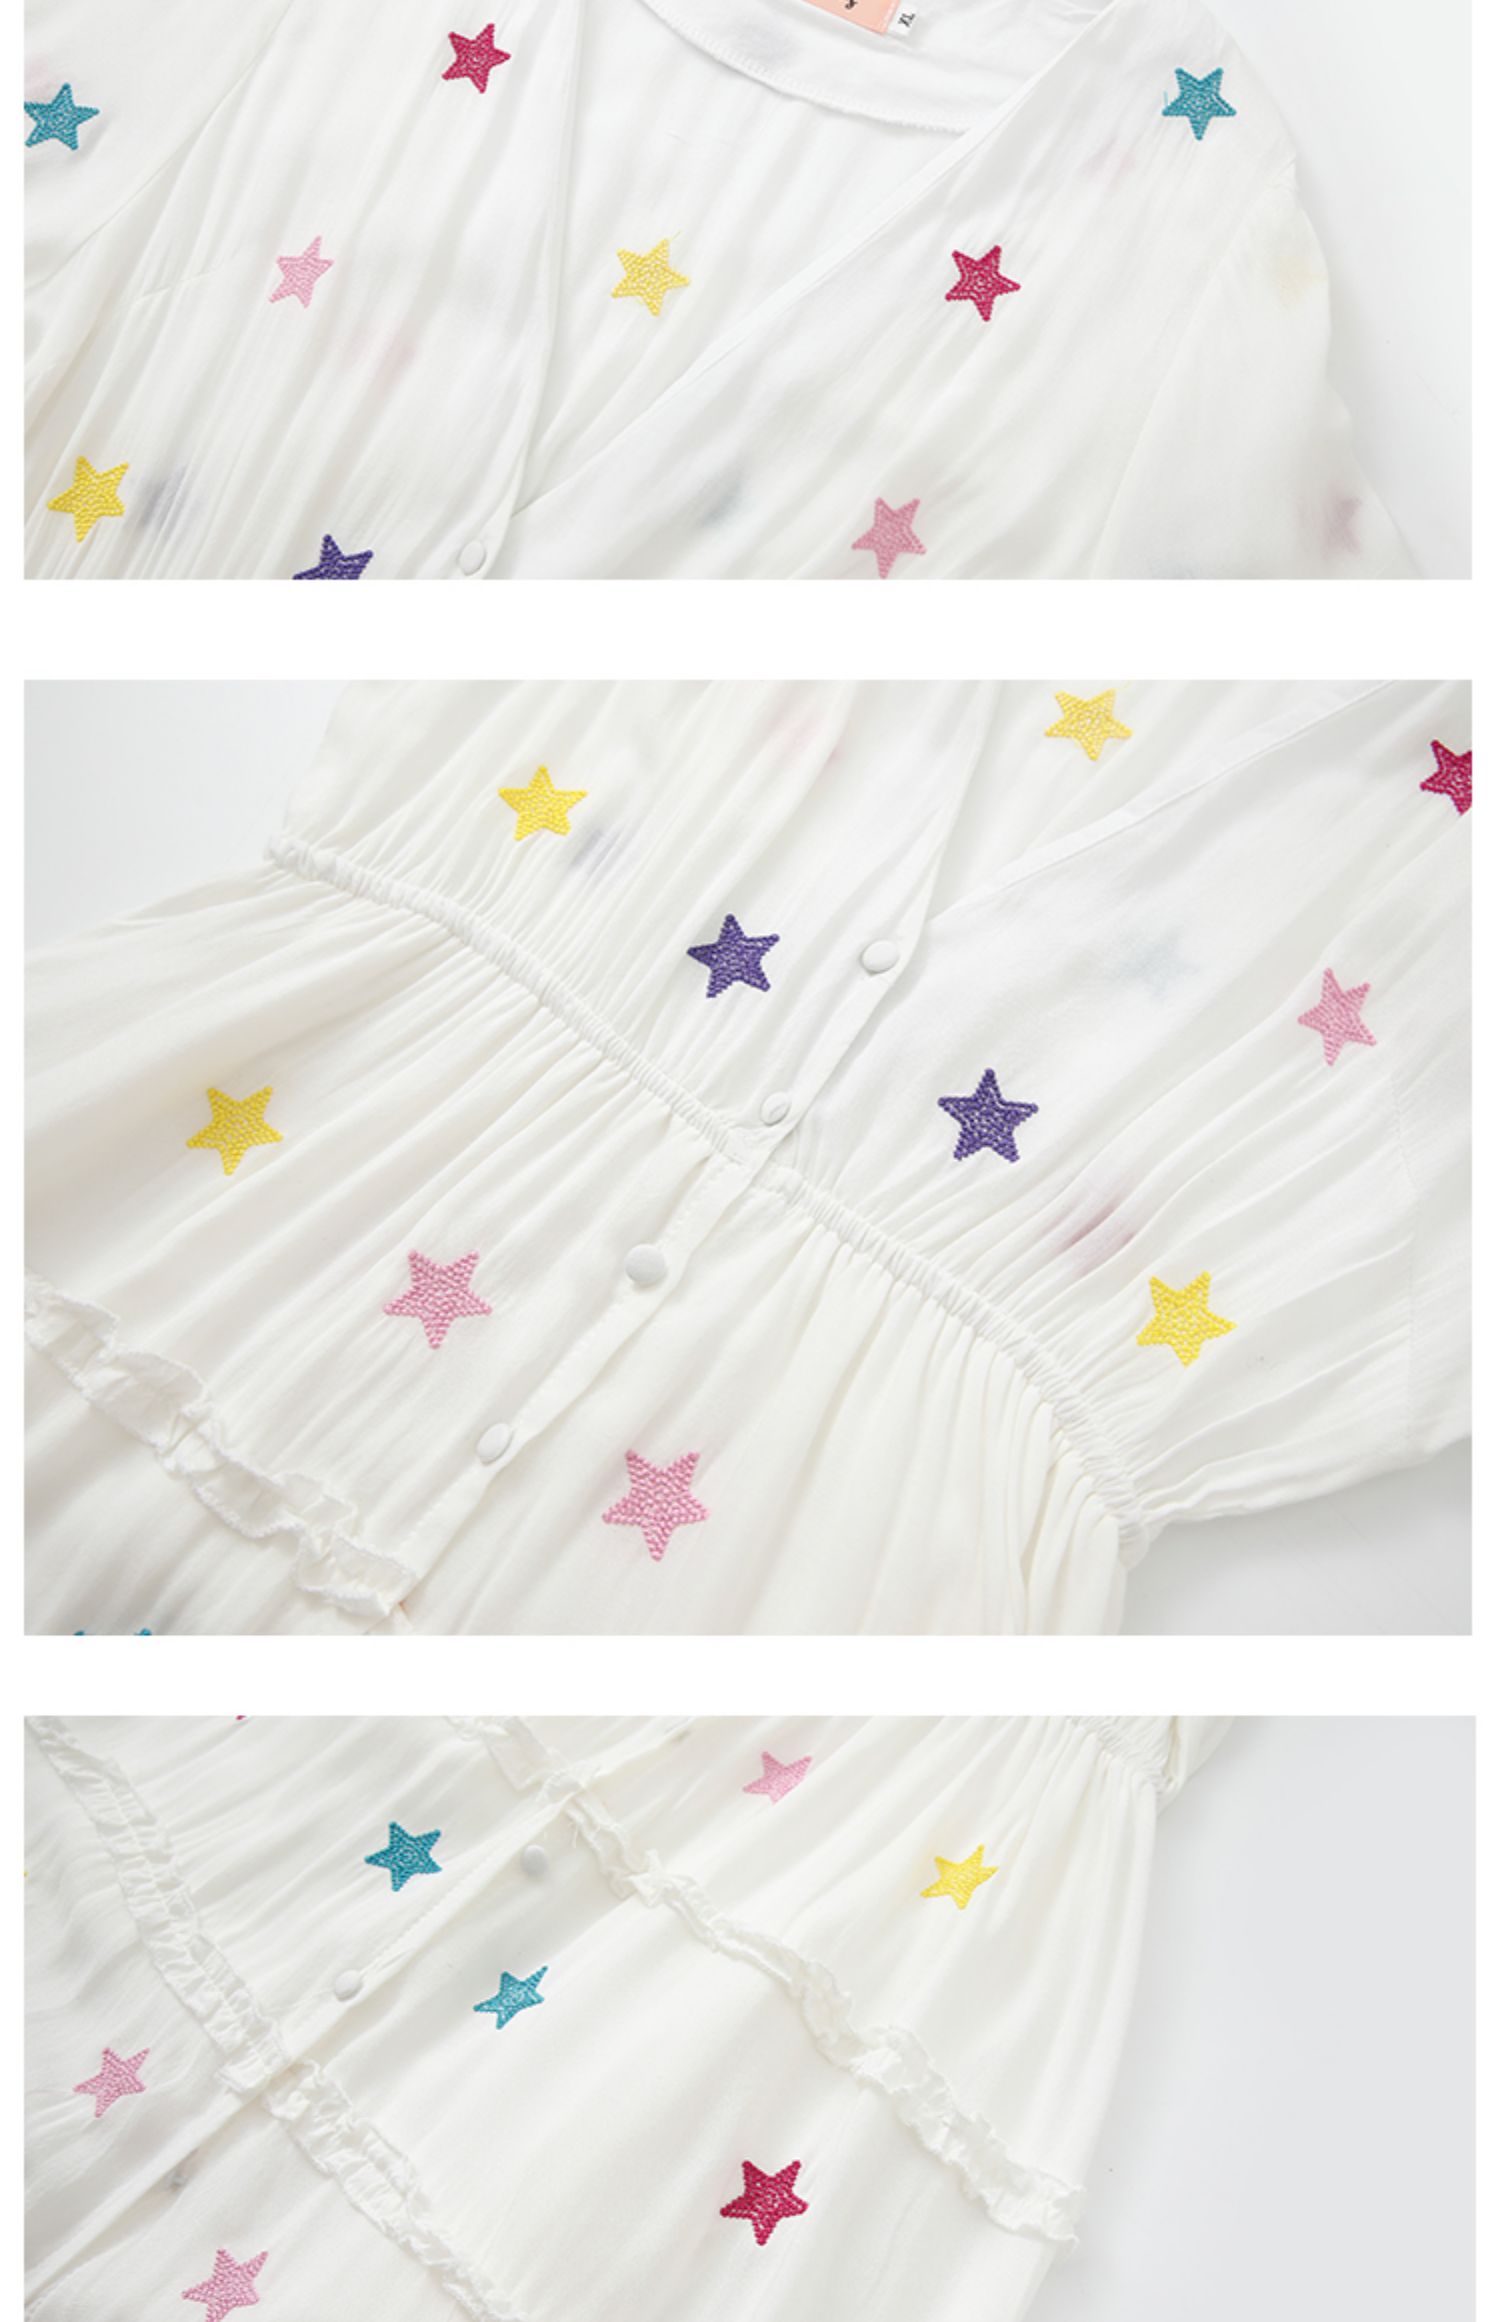 Bohemian Vacation Style Star Embroidered Seaside Vacation Tiered Dress - Dresses - Uniqistic.com